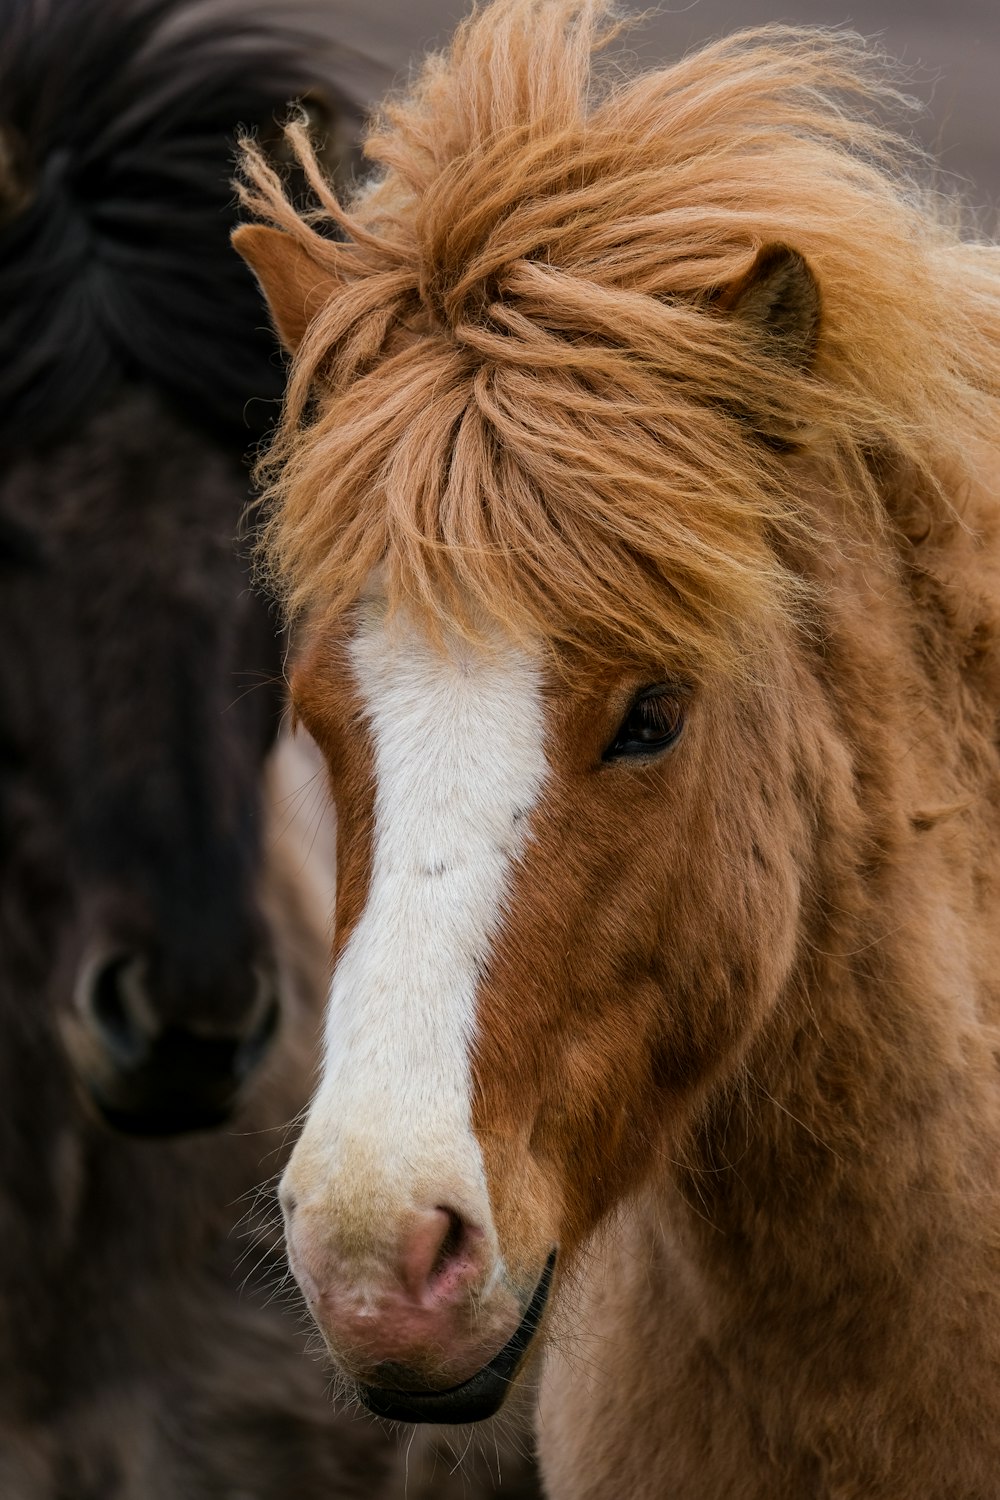 a couple of horses standing next to each other